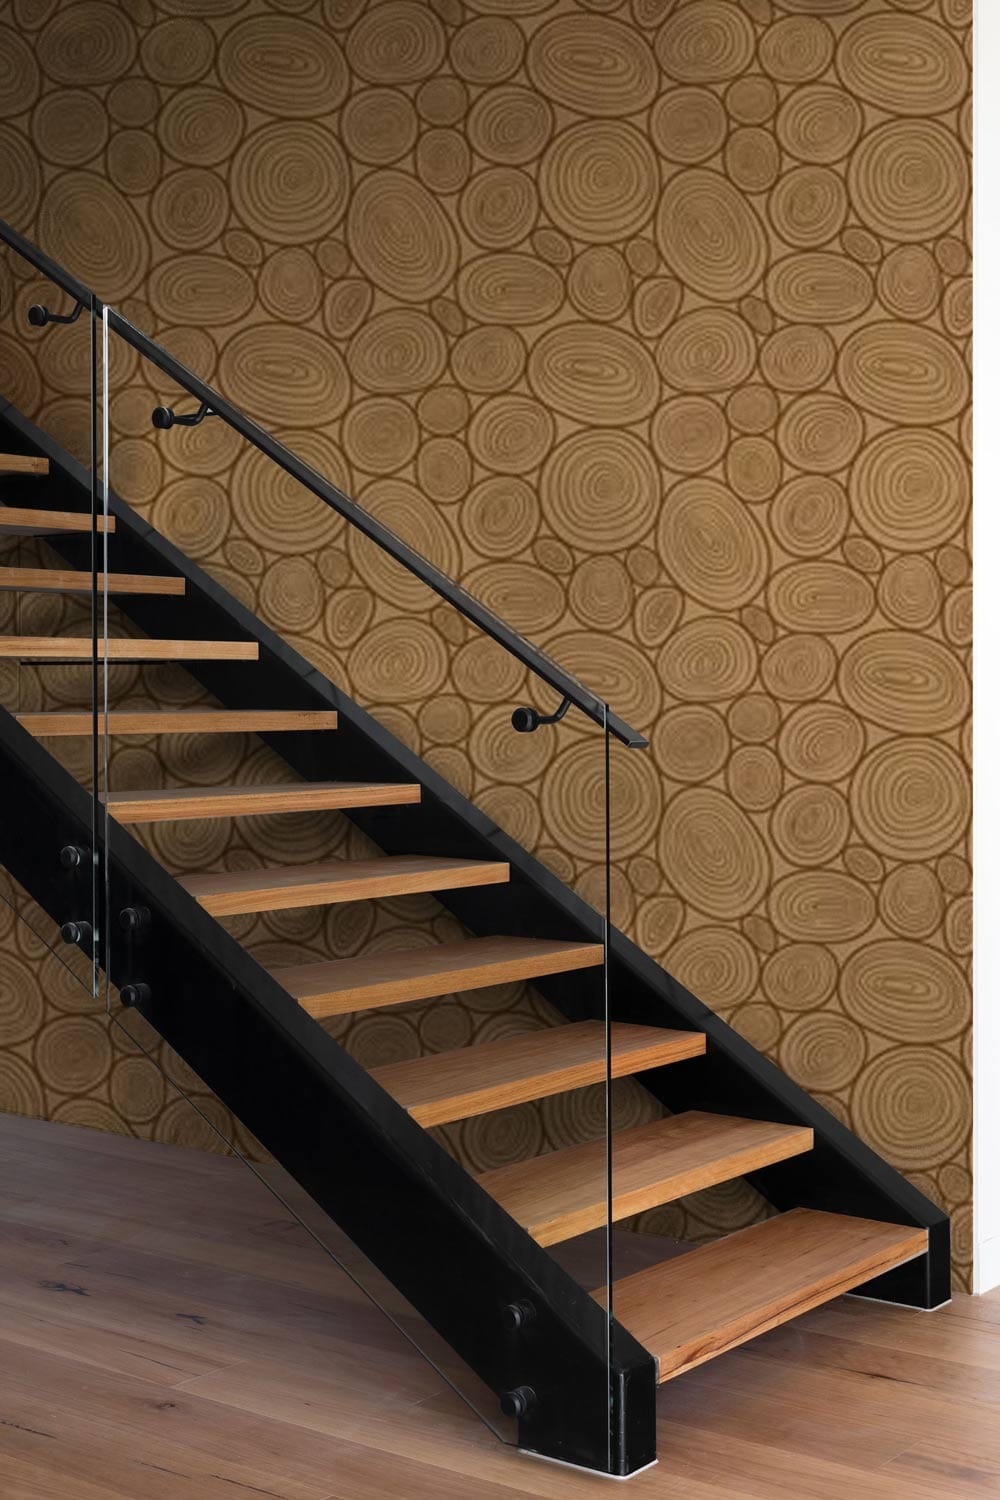 Wallpaper mural with a wood pattern effect, installed in the hallway